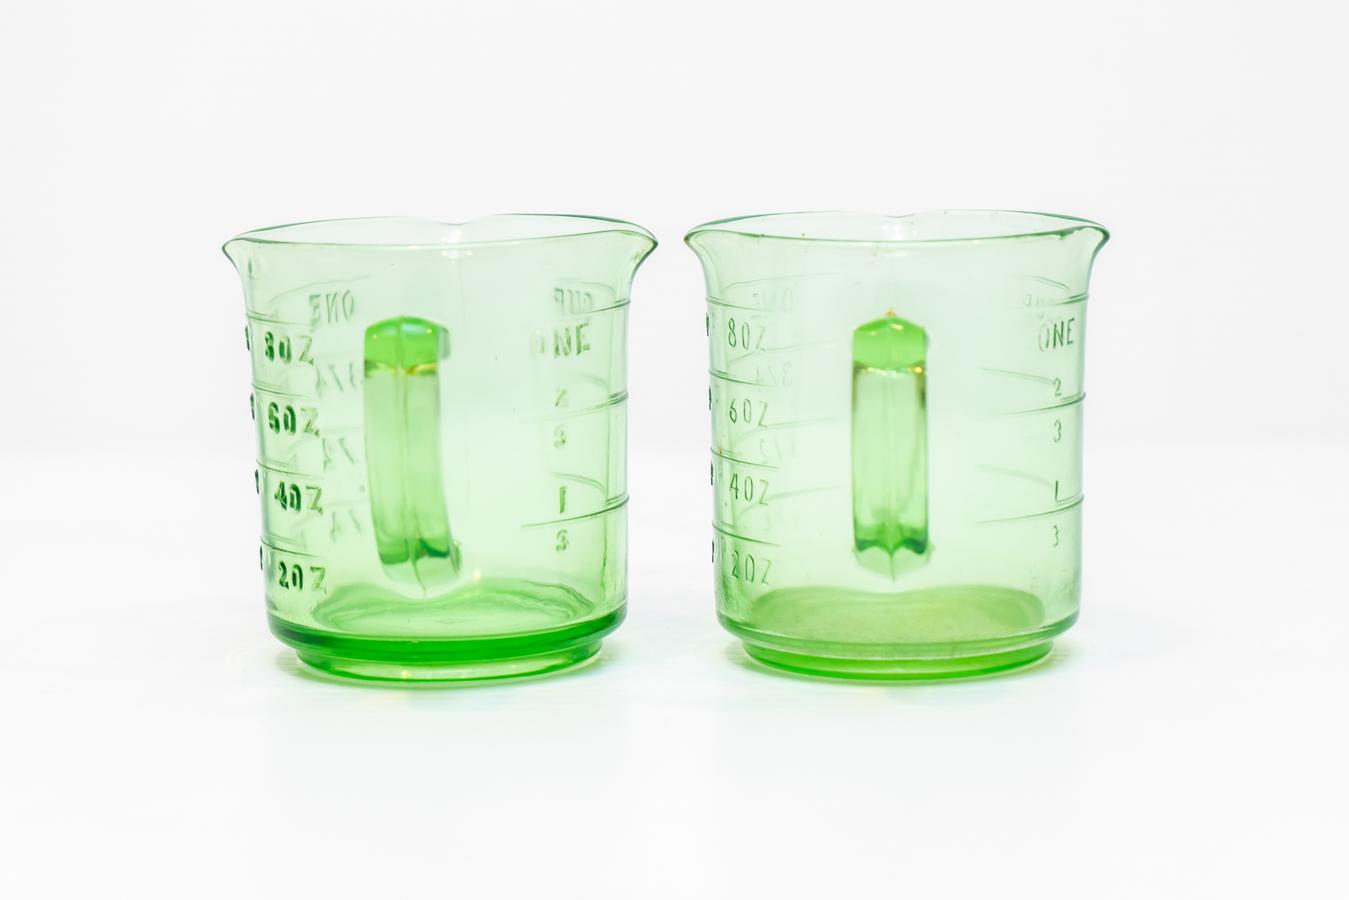 Dark Green Glass Measuring Cup, Unmarked 1 Cup Measure 